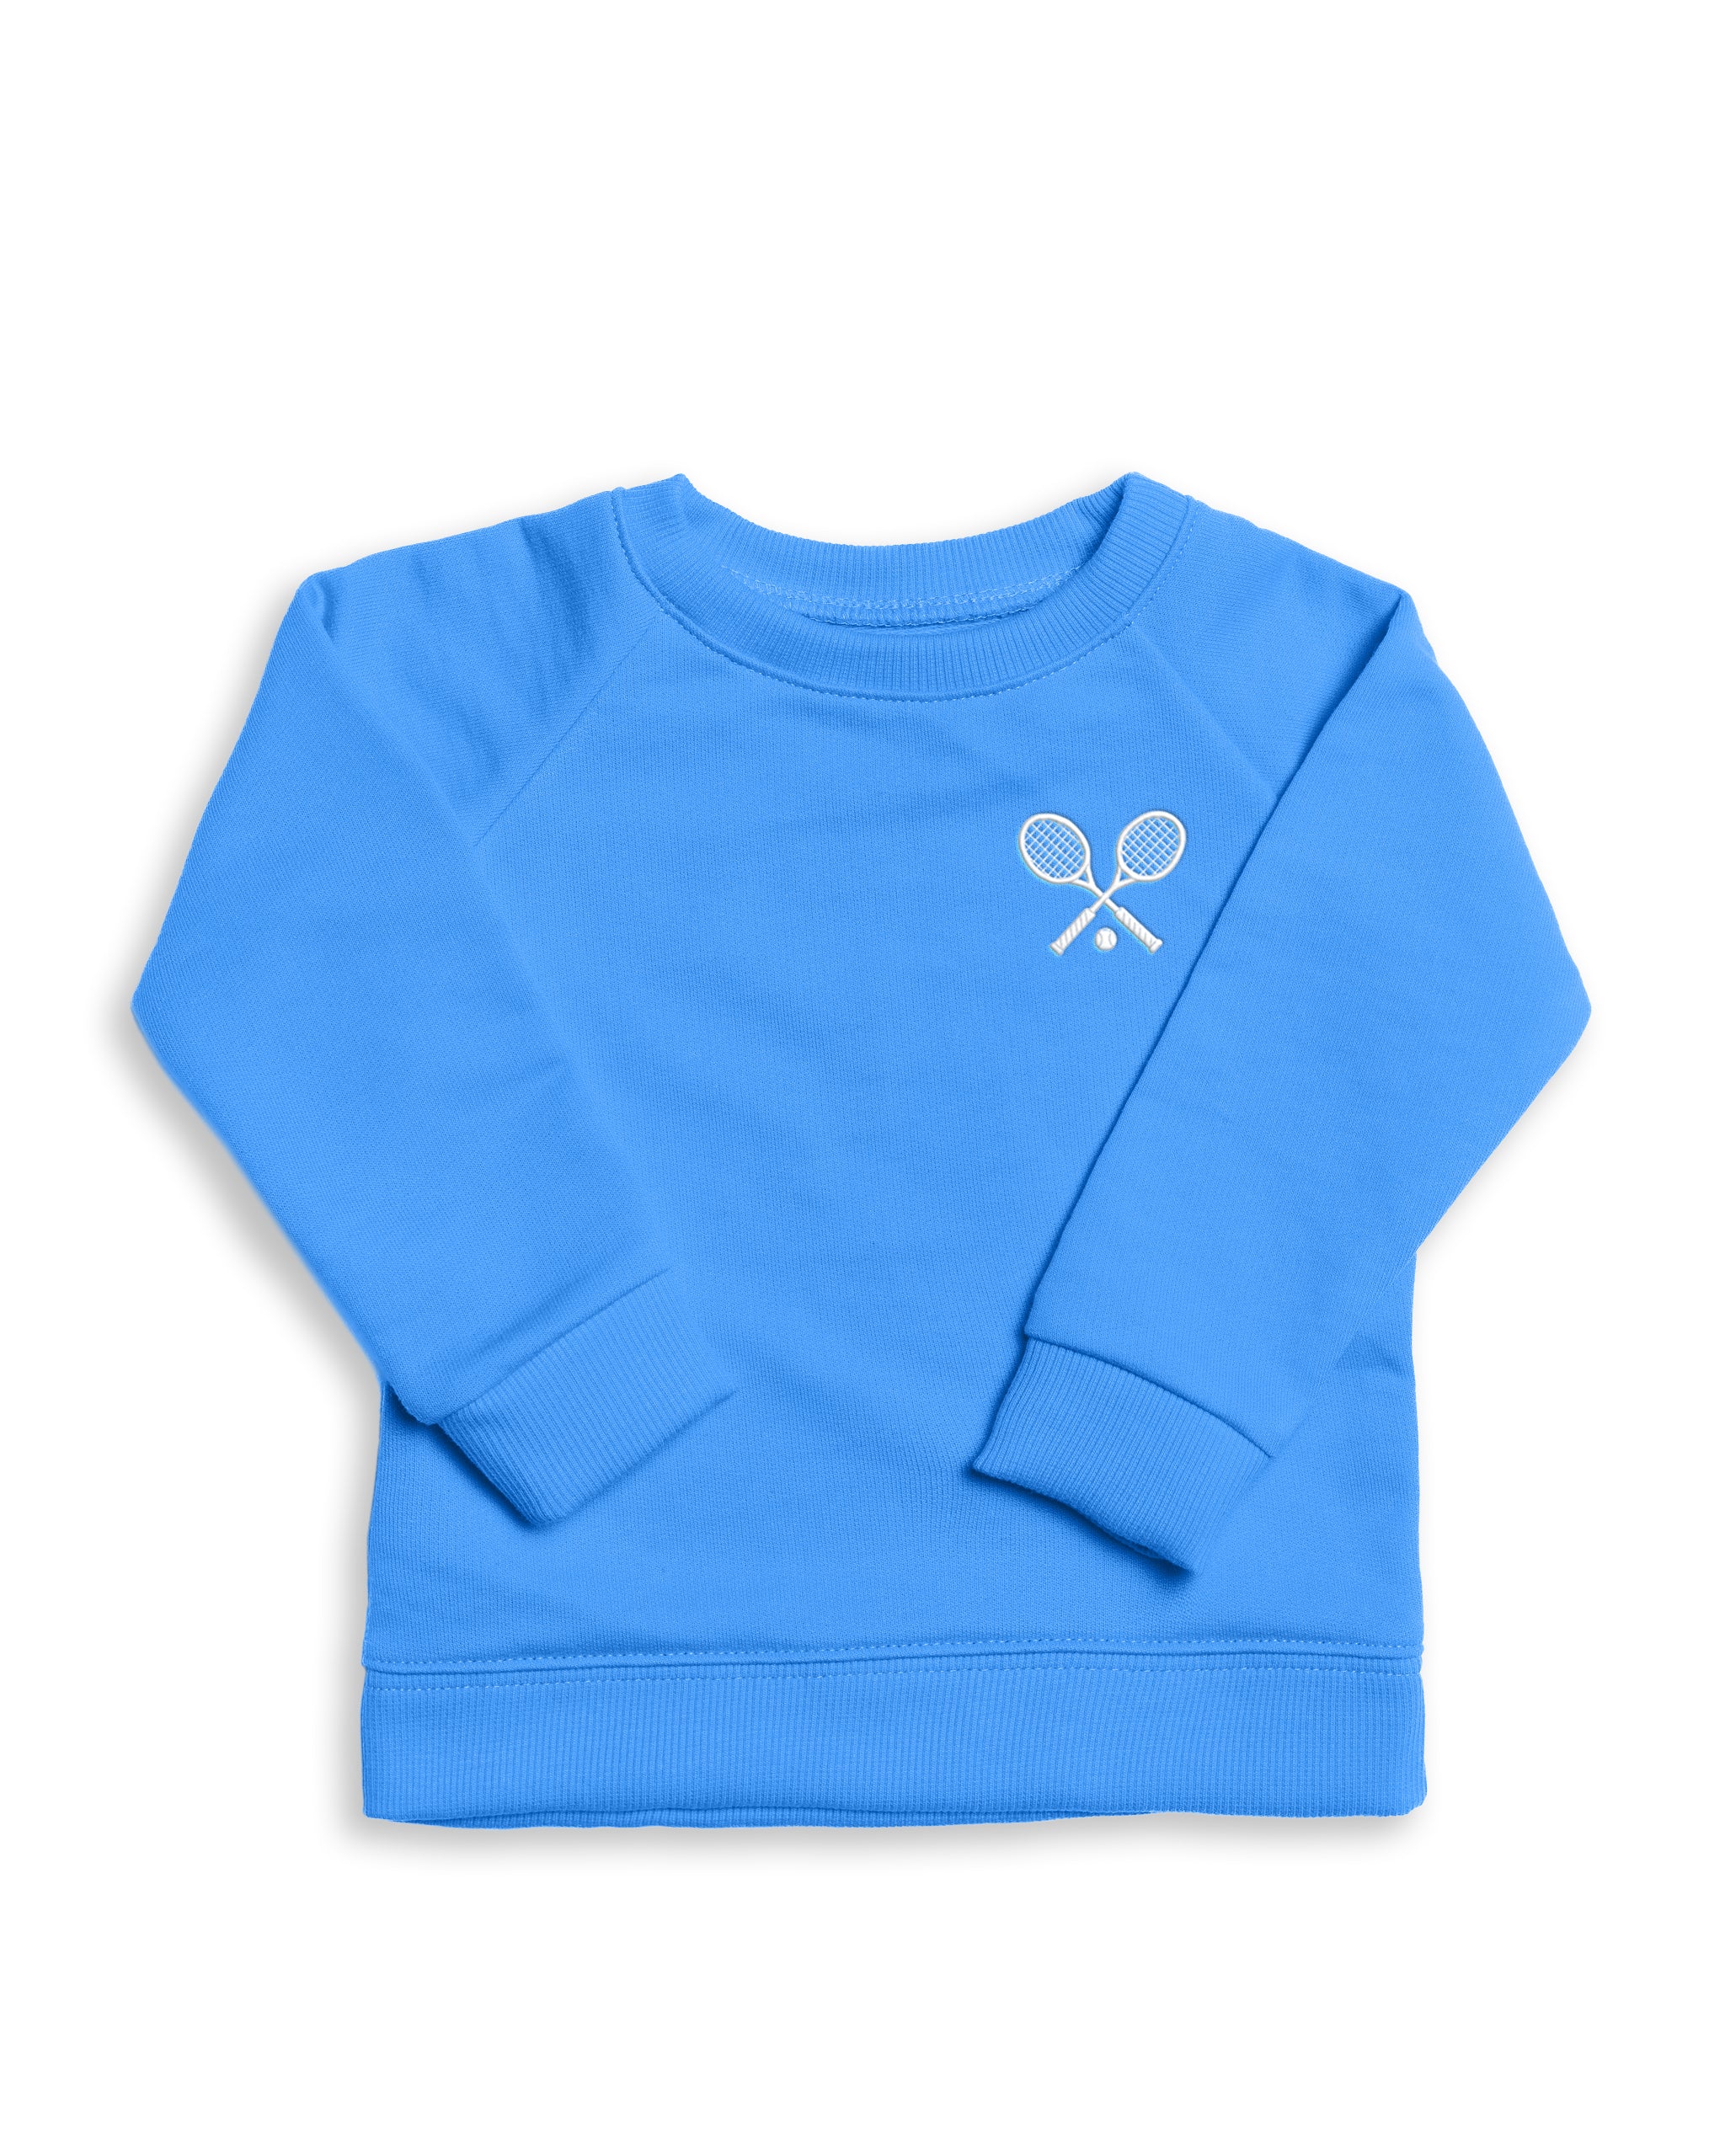 The Organic Embroidered Pullover Sweatshirt #color_Marine Blue Tennis